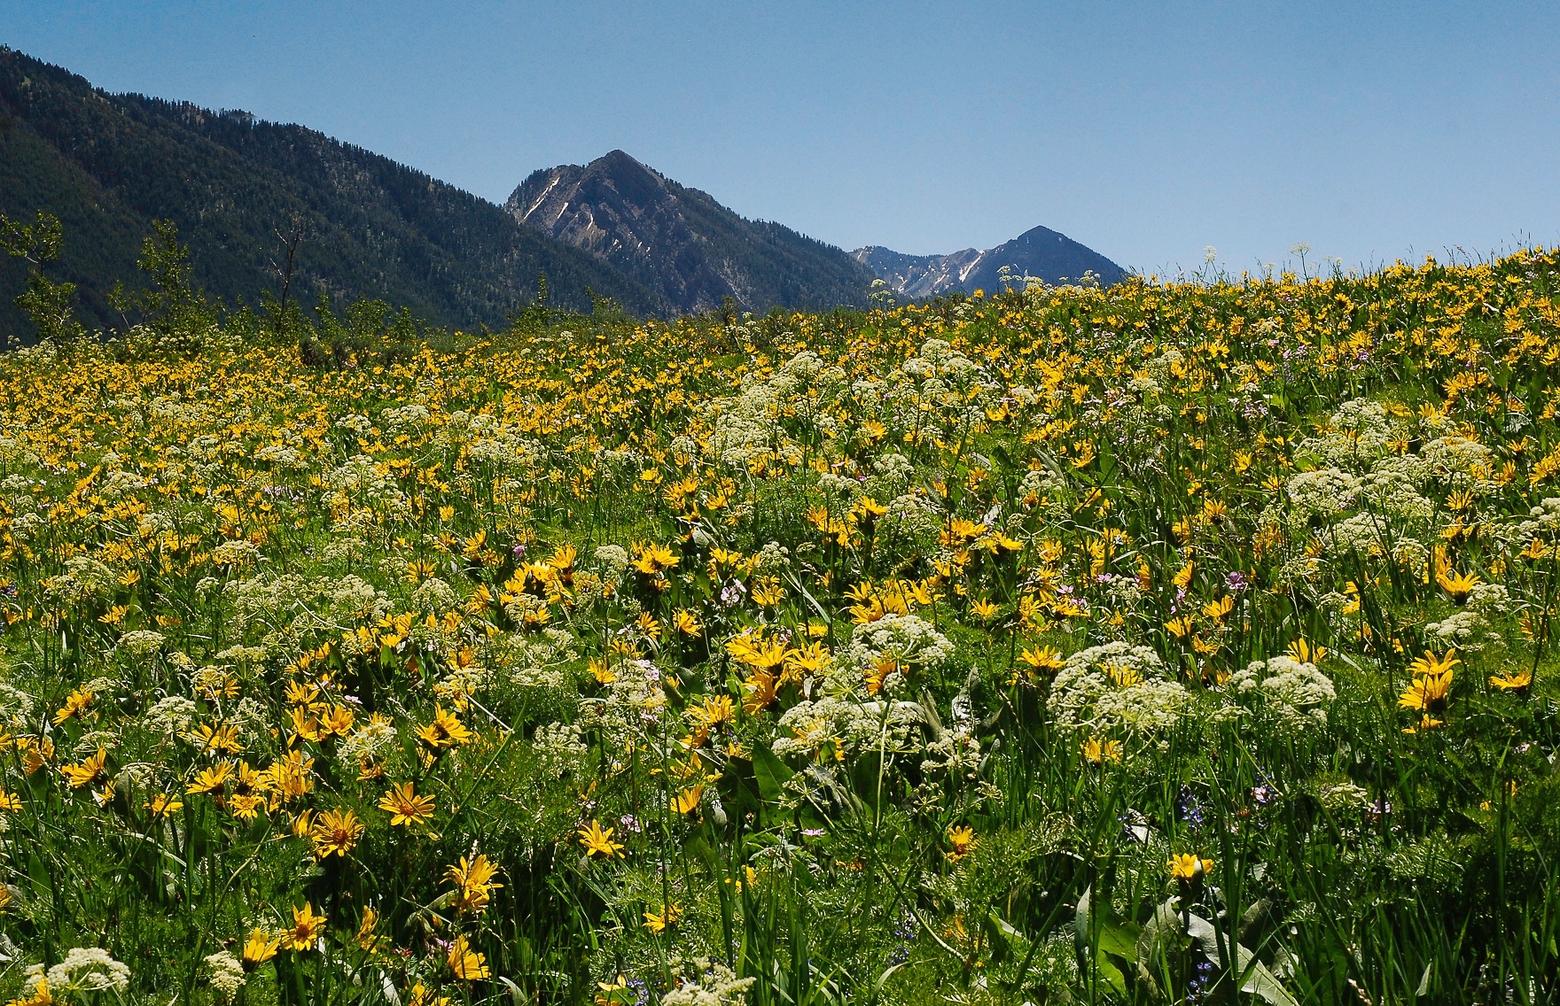 The riot of a zillion petals of arrowhead balsamroot in bloom in Greater Yellowstone. As a sight it commands awe and fills the heart with joy but seldom is such worth considered in the commodity balance sheets of a multiple use land management agency. Susan Marsh knows. For decades, as a career civil servant with the Forest Service, Susan Marsh tried to give voice to "intrinsic values" in Nature and she continues to do so with her prose and poetry. Photo courtesy Susan Marsh. 